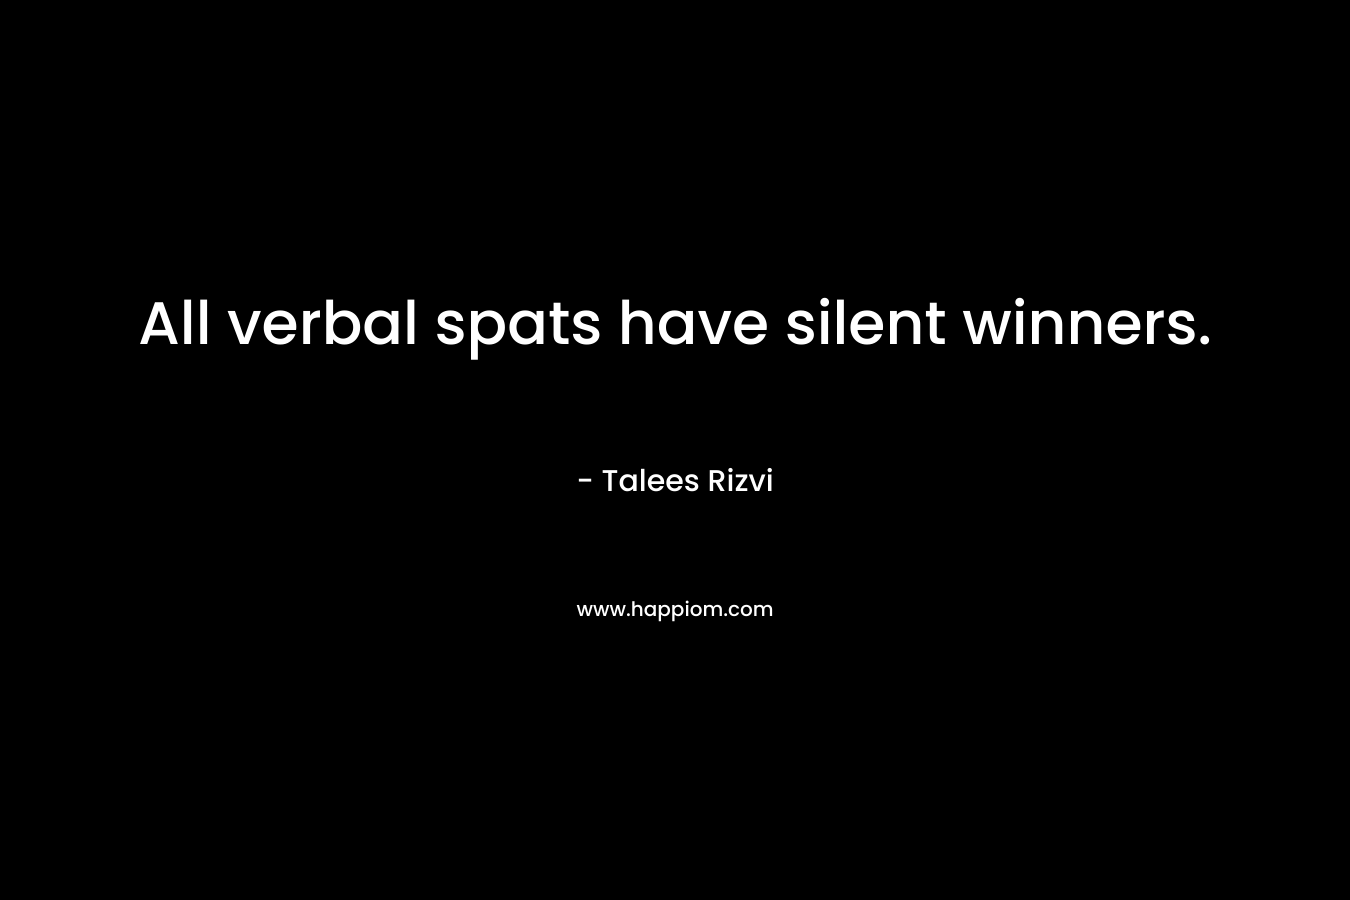 All verbal spats have silent winners.